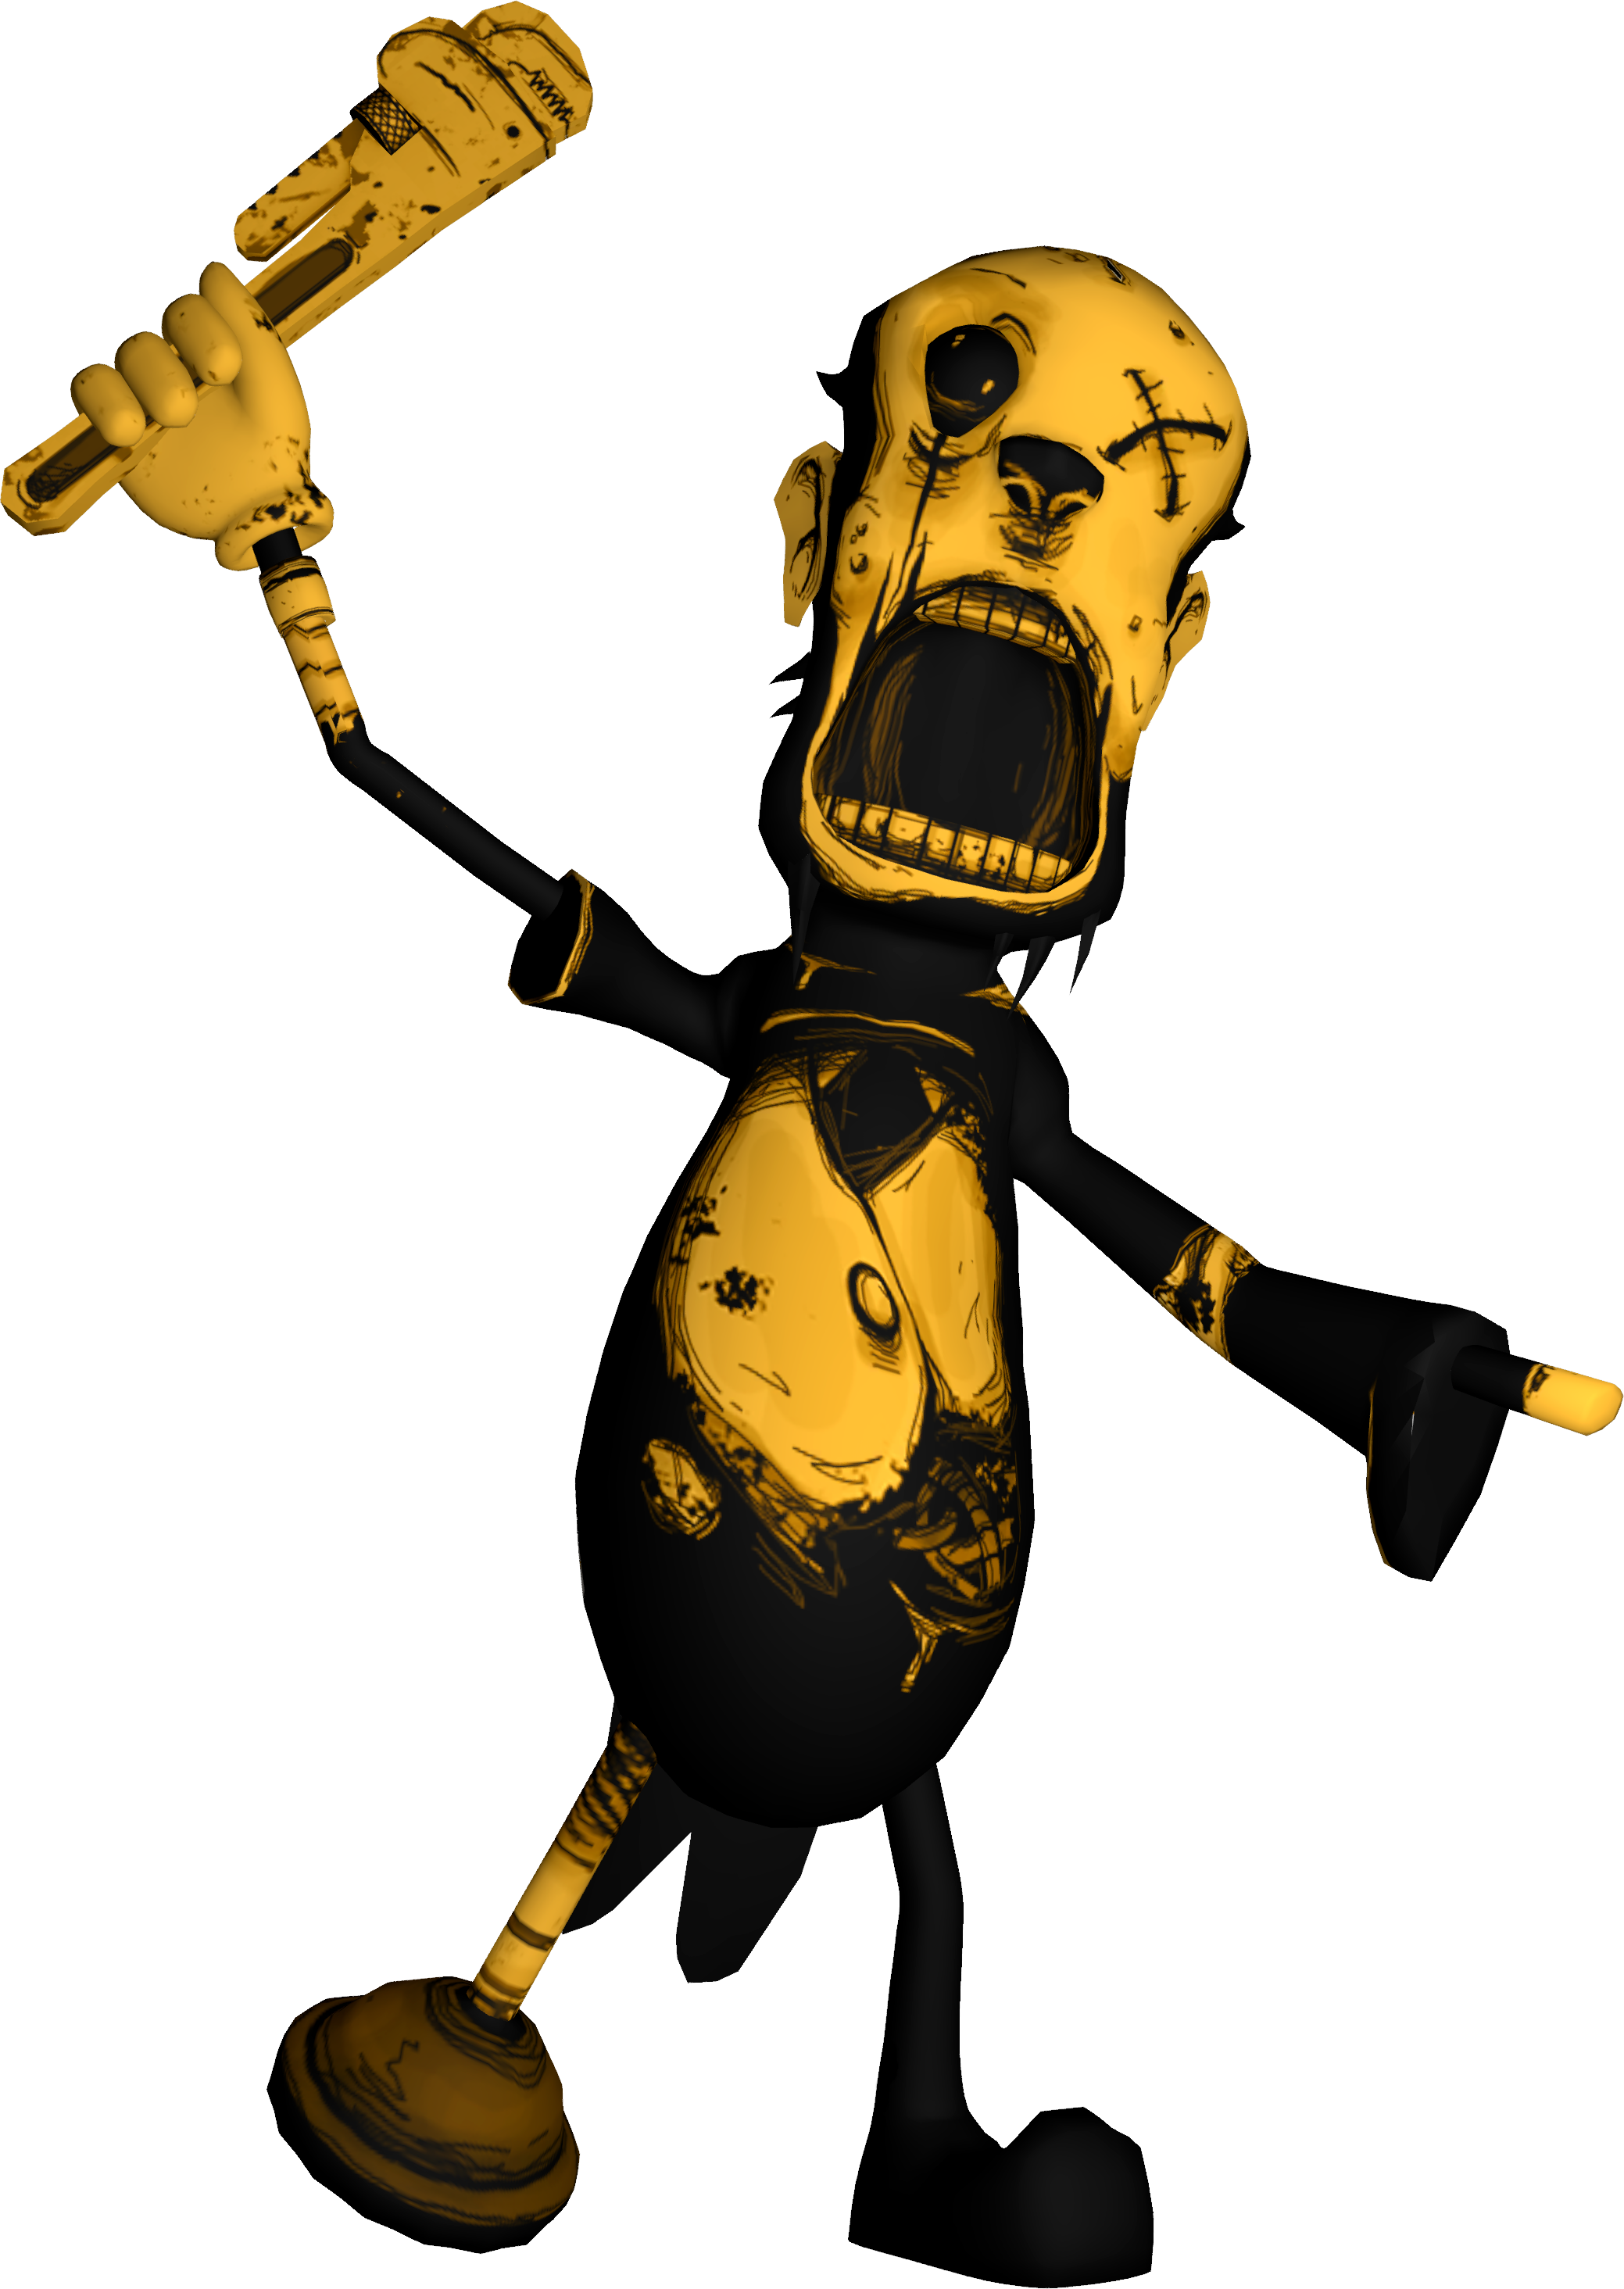 Bendy and the Ink Machine Song, Bendy Wiki